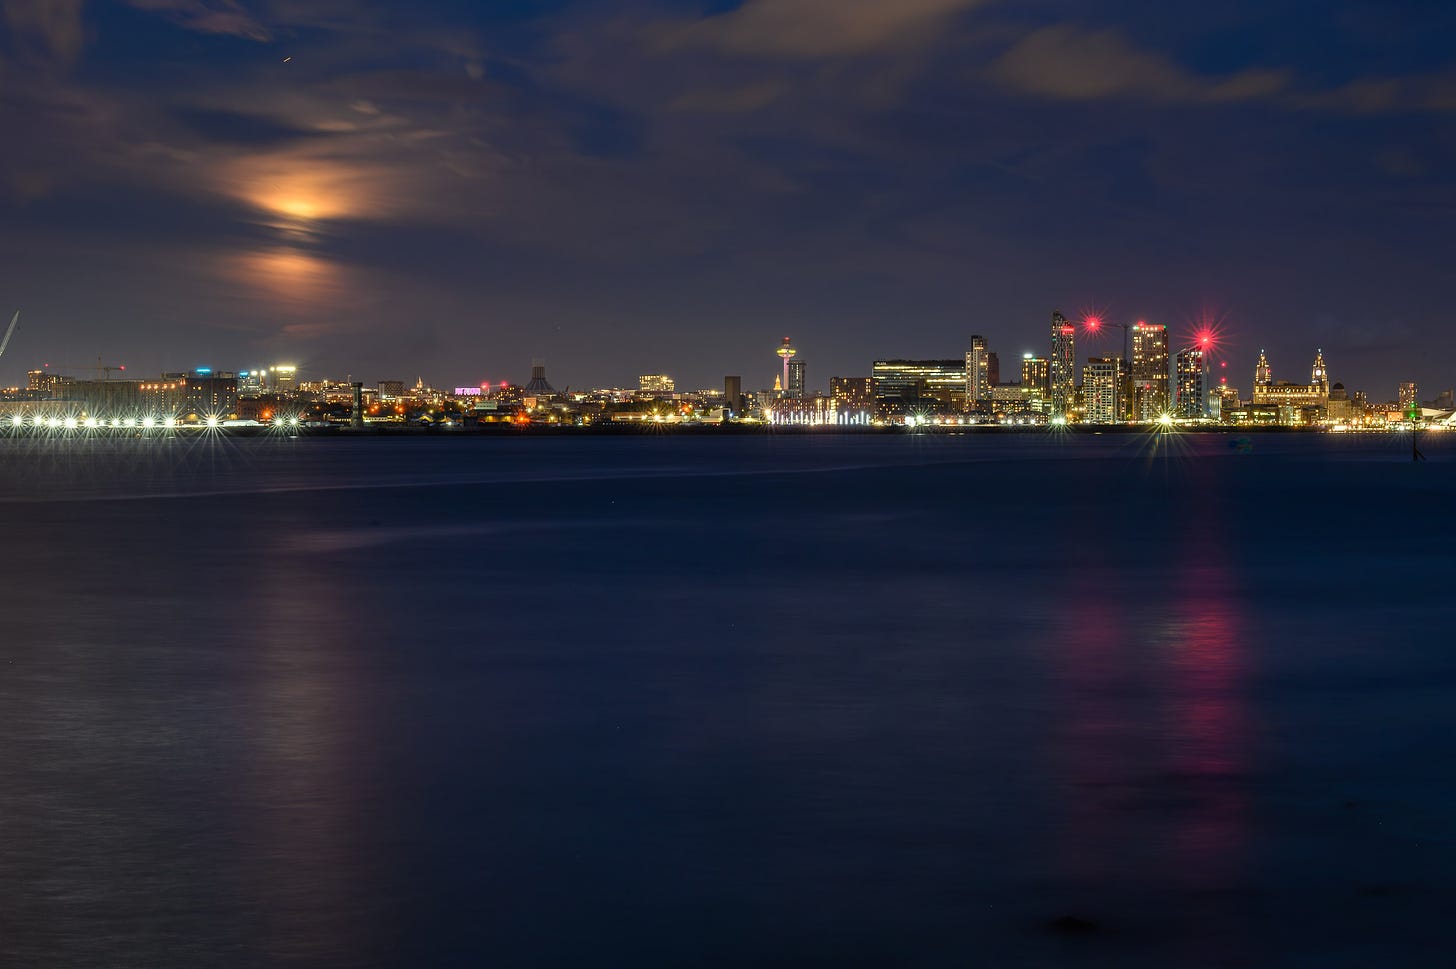 The moon rises behind clouds looking like a spacial anomaly over the city of Liverpool.